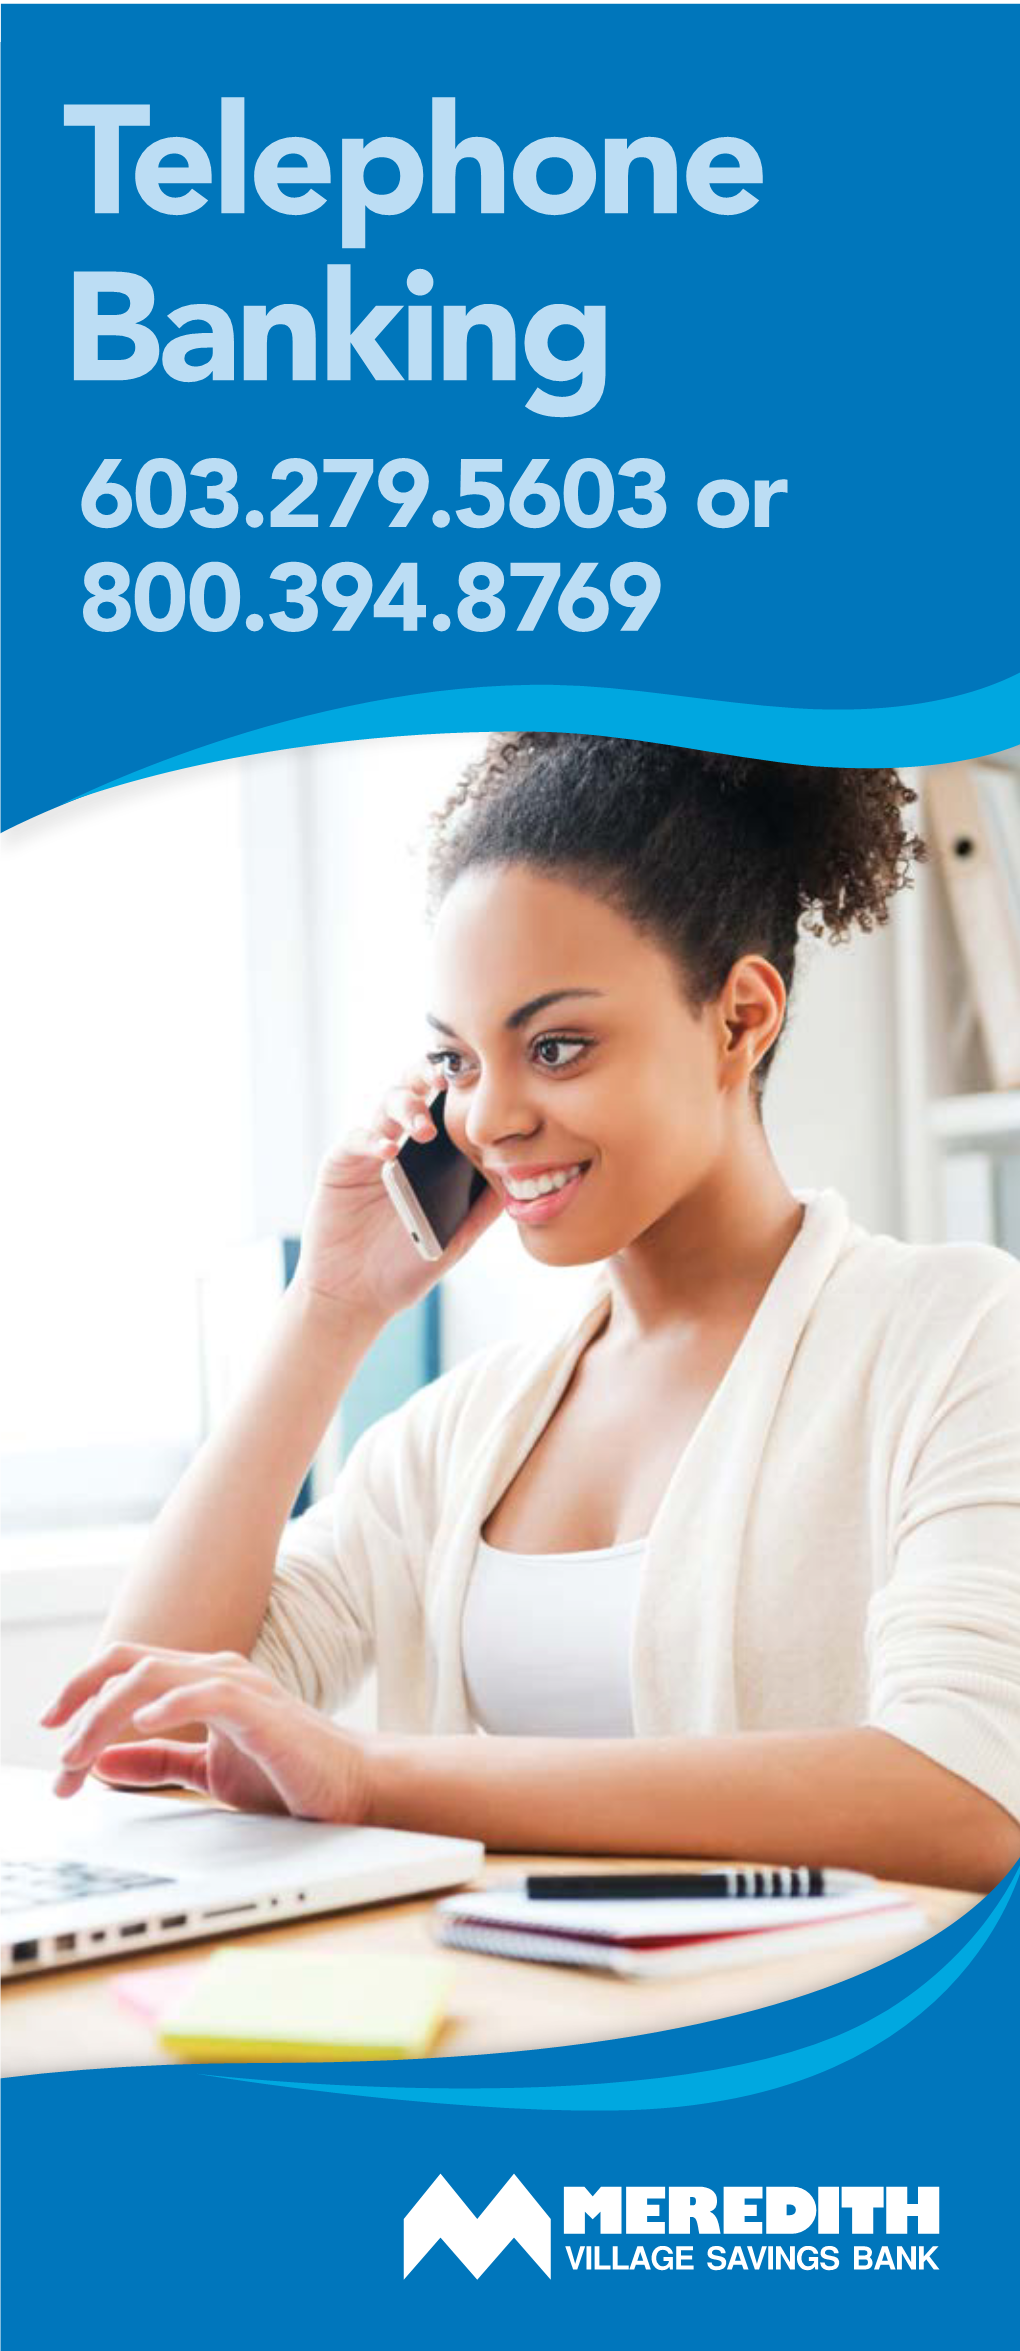 Telephone Banking 603.279.5603 Or 800.394.8769 START: To Use Touchtone, PRESS 1 to Use Your Voice, PRESS 2